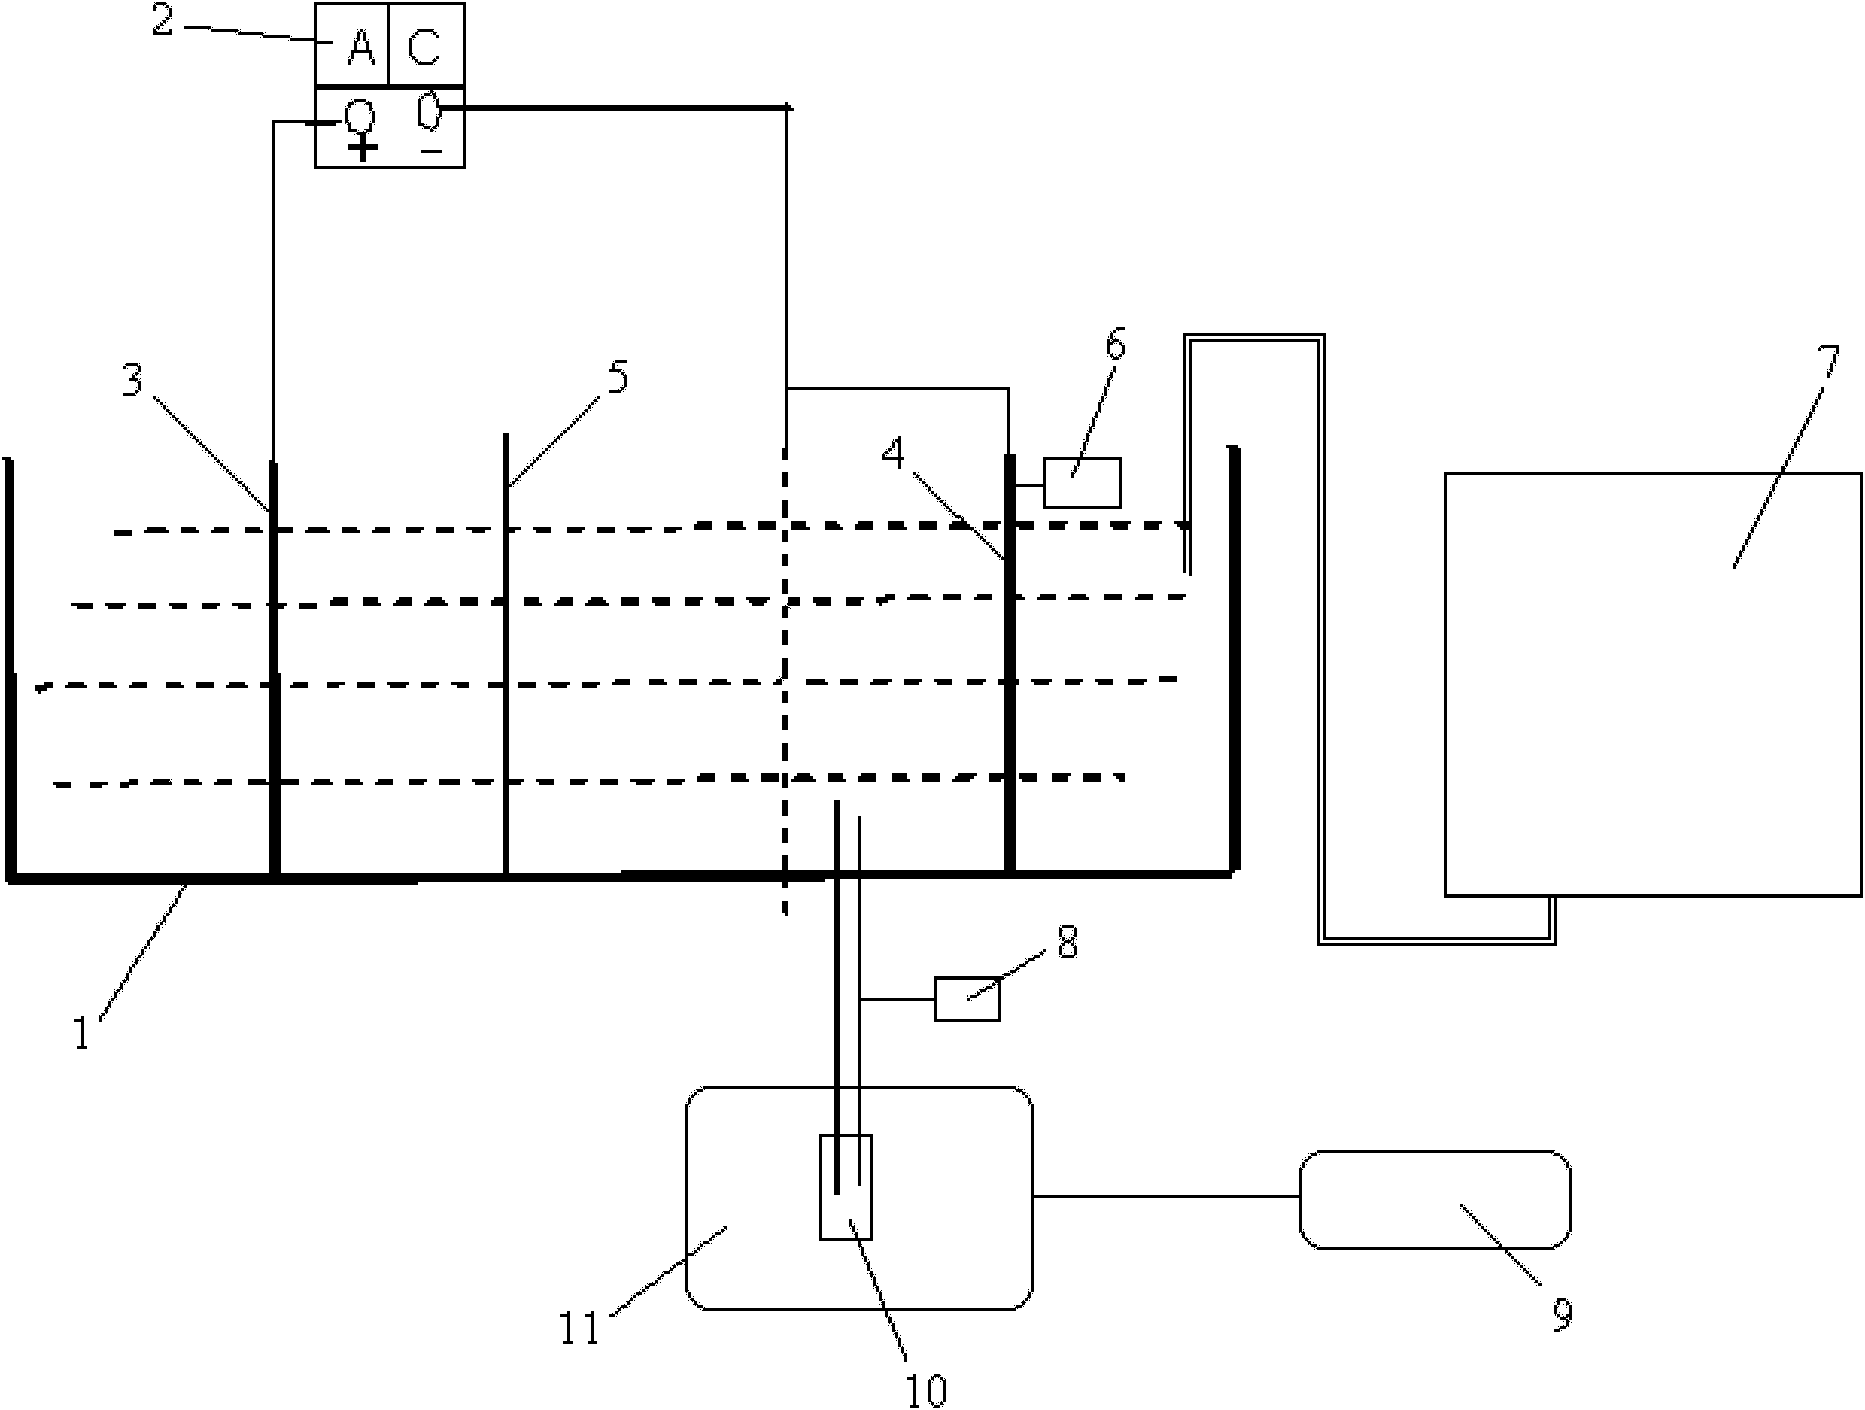 Dyeing apparatus for electrochemical reduction of cotton yarns